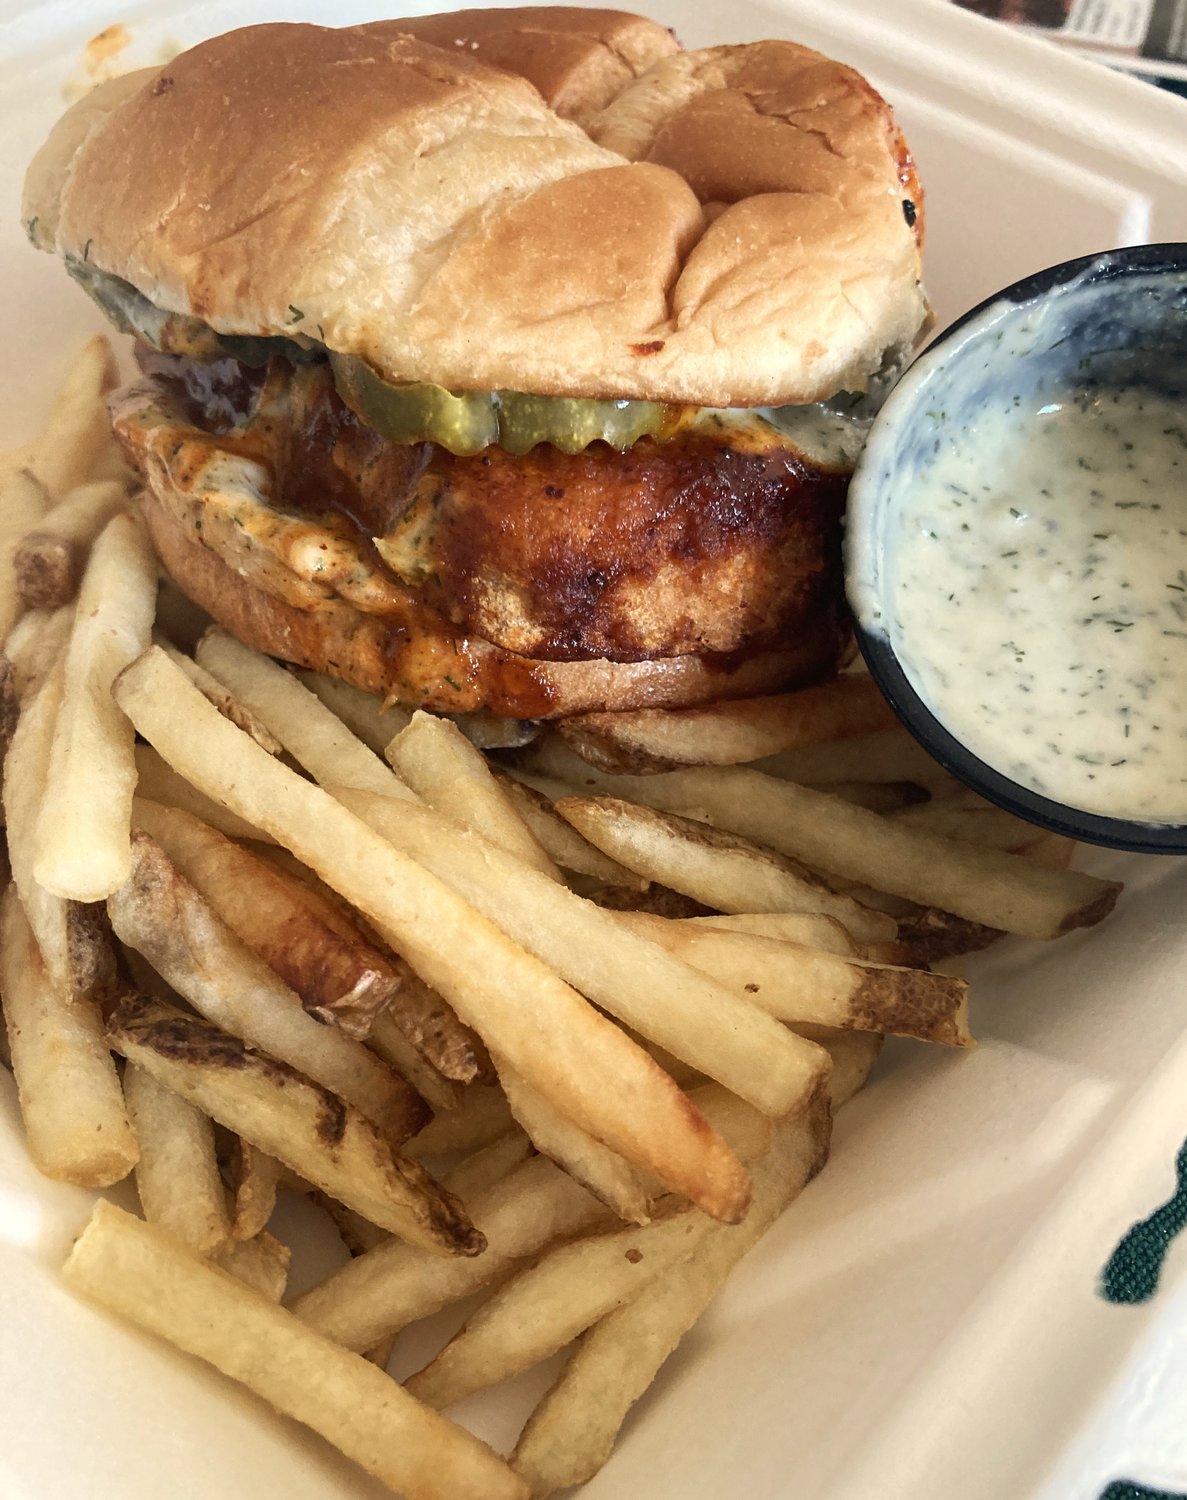 The Nashville tofu sandwich at Veg Head, which opened in downtown Lansing in October of this year.